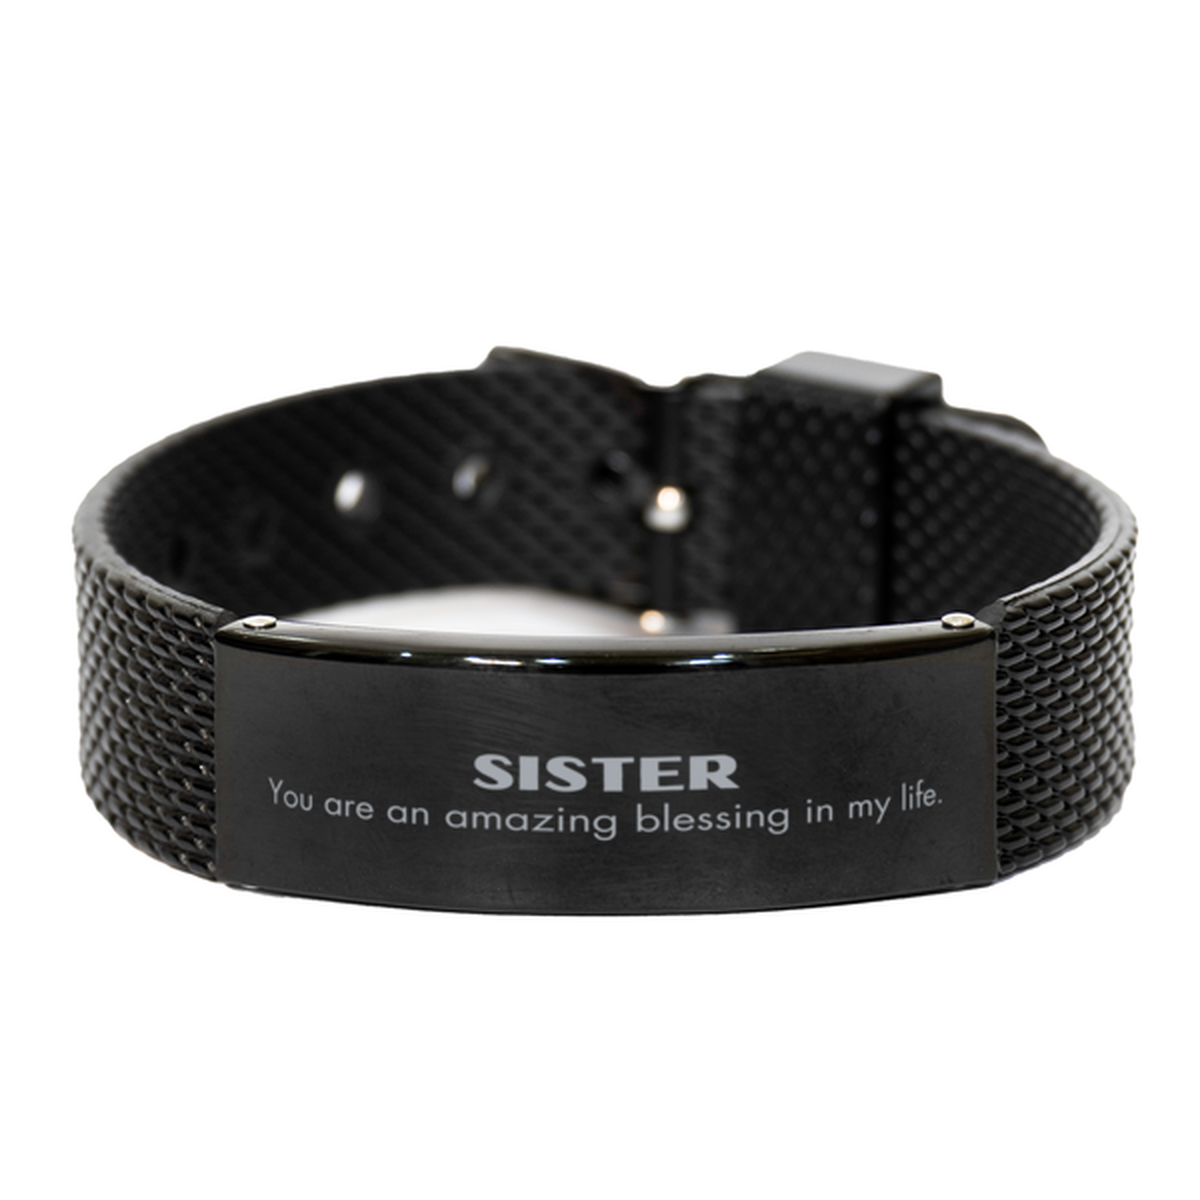 Sister Black Shark Mesh Bracelet, You are an amazing blessing in my life, Thank You Gifts For Sister, Inspirational Birthday Christmas Unique Gifts For Sister